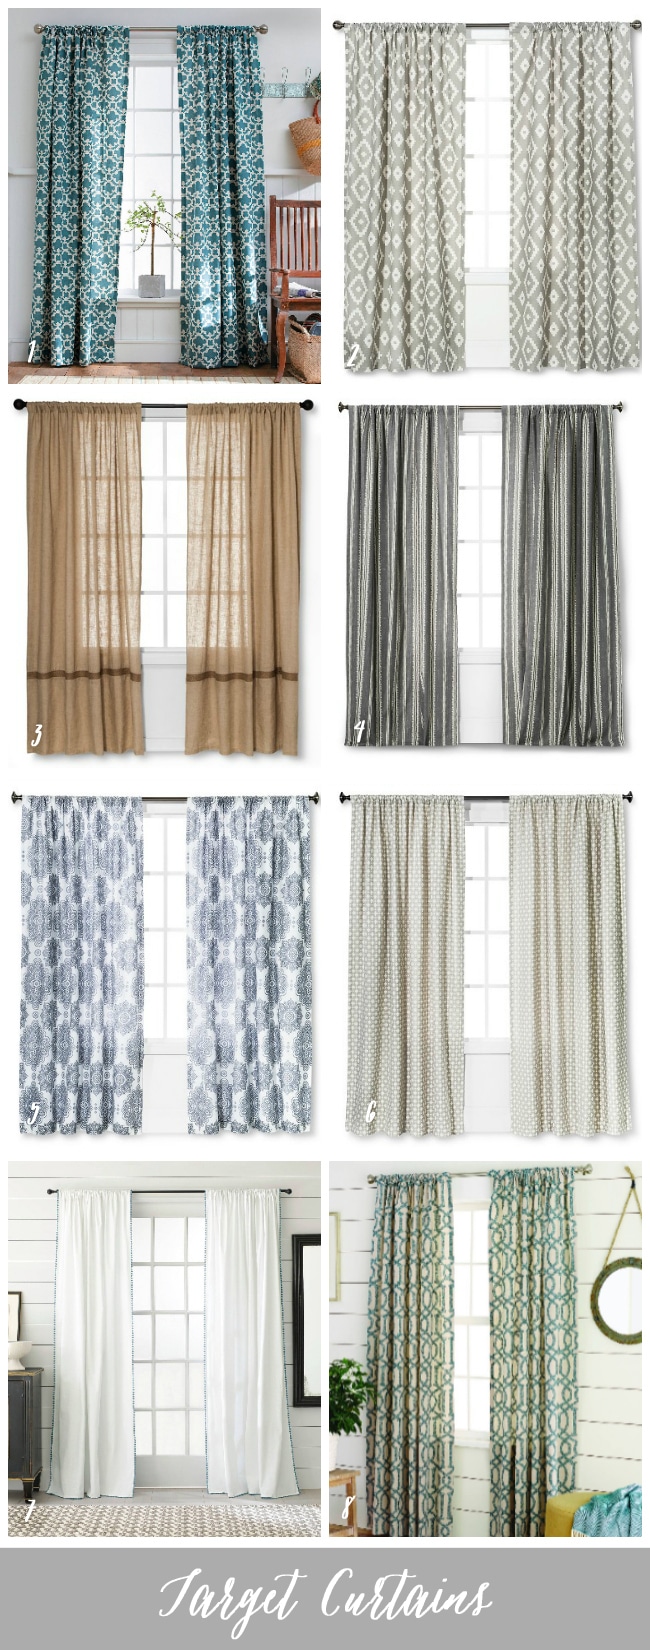 The Question of Curtain Panels - The Inspired Room